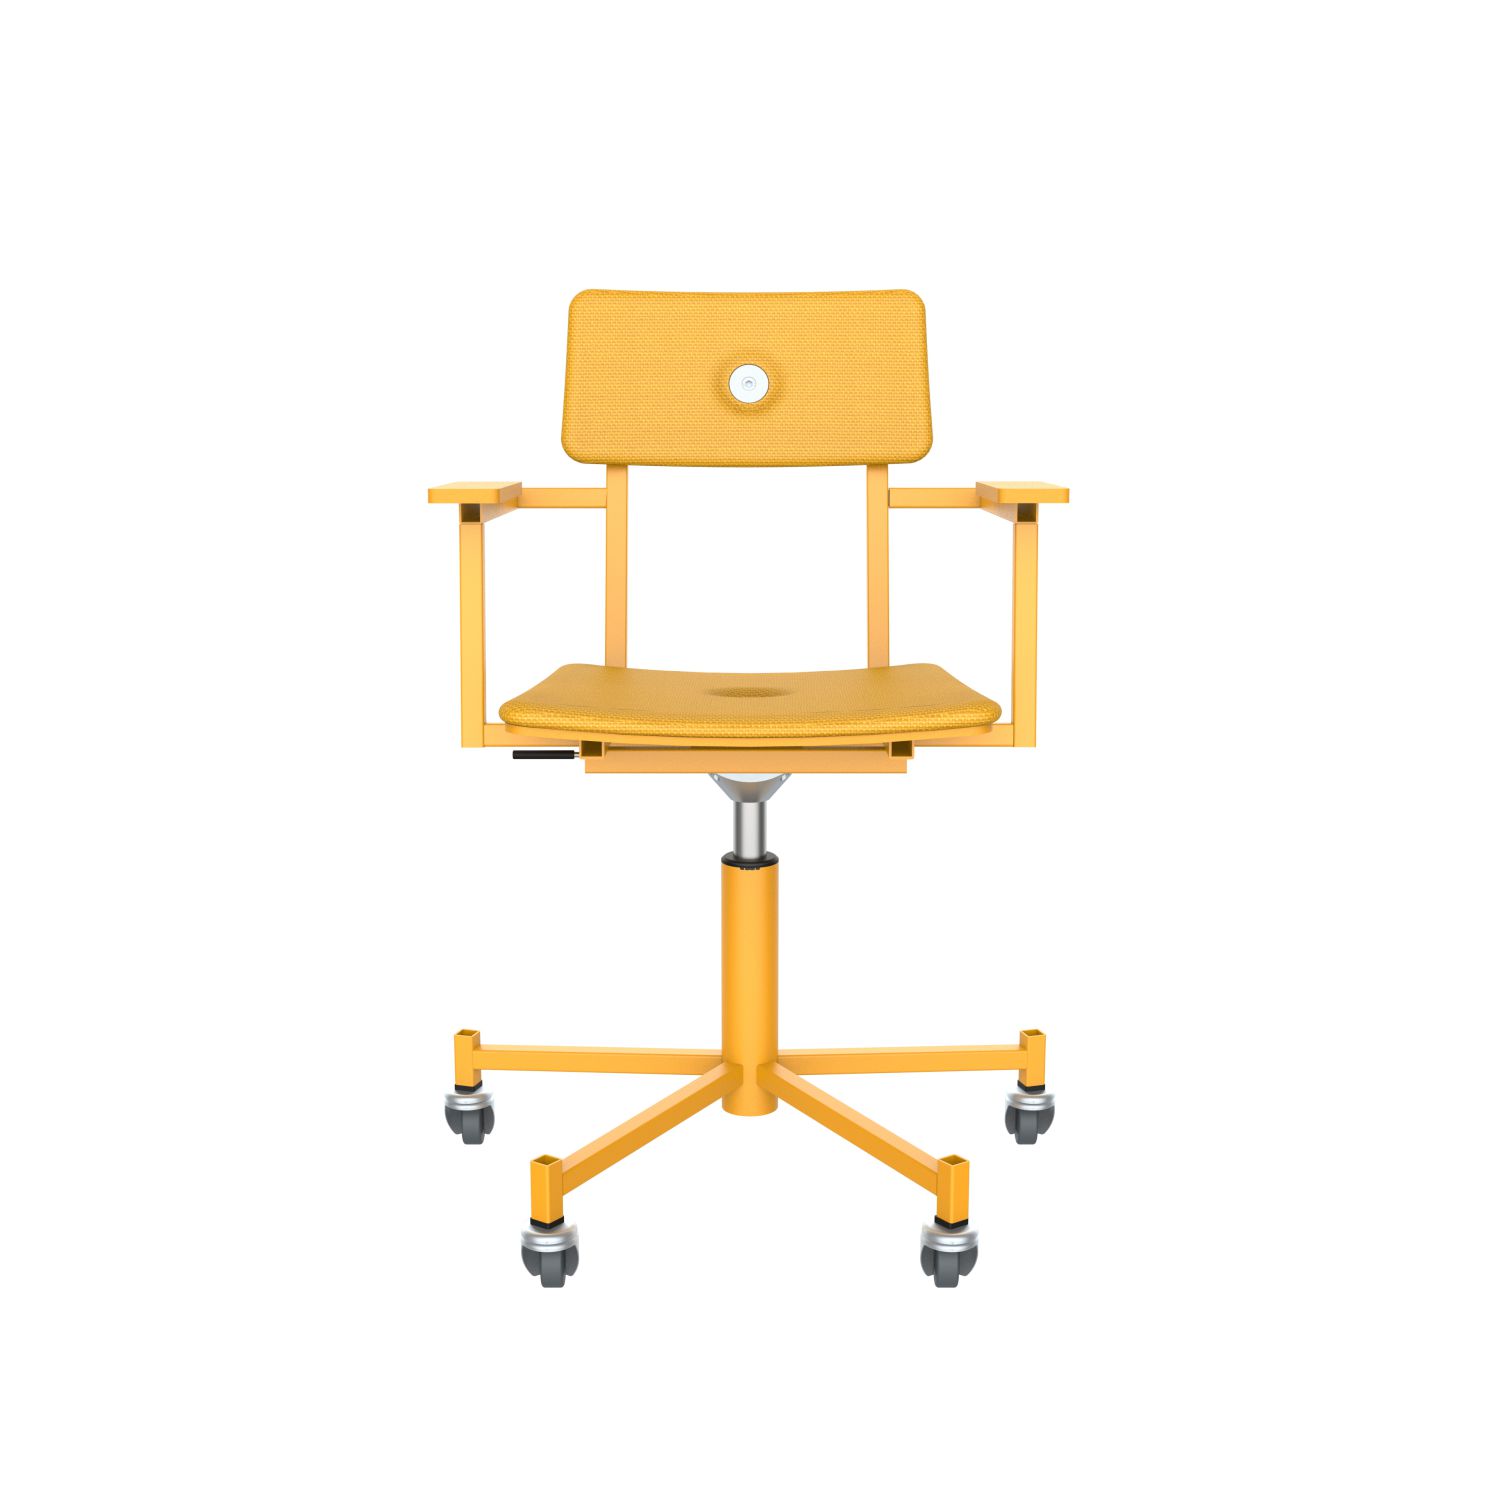 lensvelt piet hein eek mitw upholstered office chair with armrests lemon yellow 051 signal yellow ral1003 with wheels